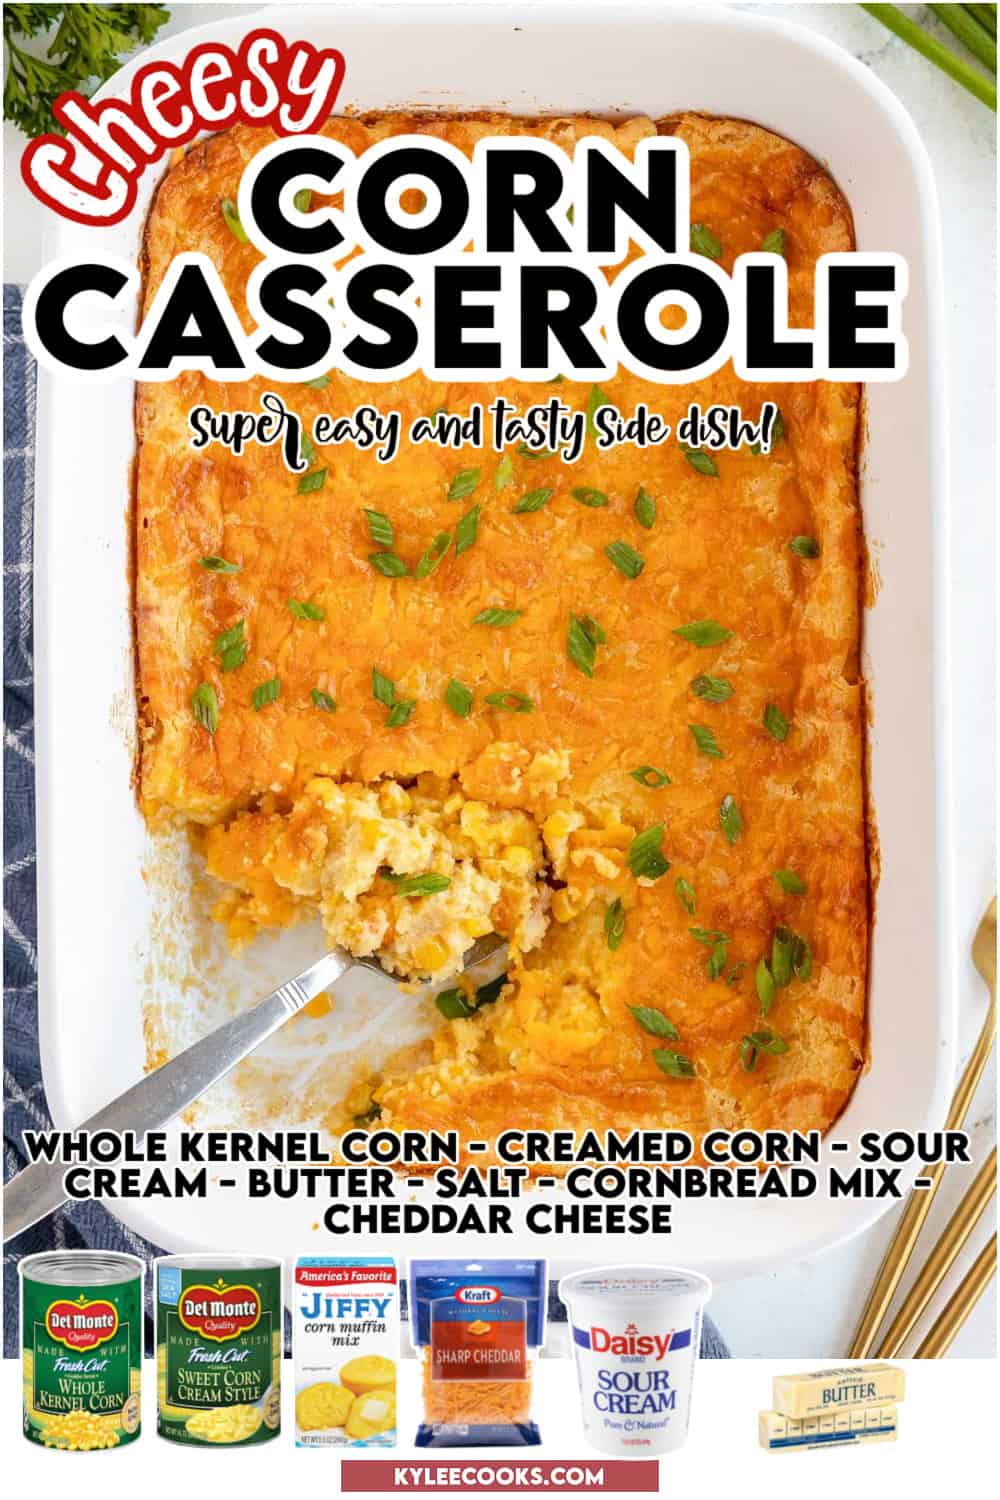 Cheesy corn casserole in a white dish with recipe and and ingredients over laid in text and images.